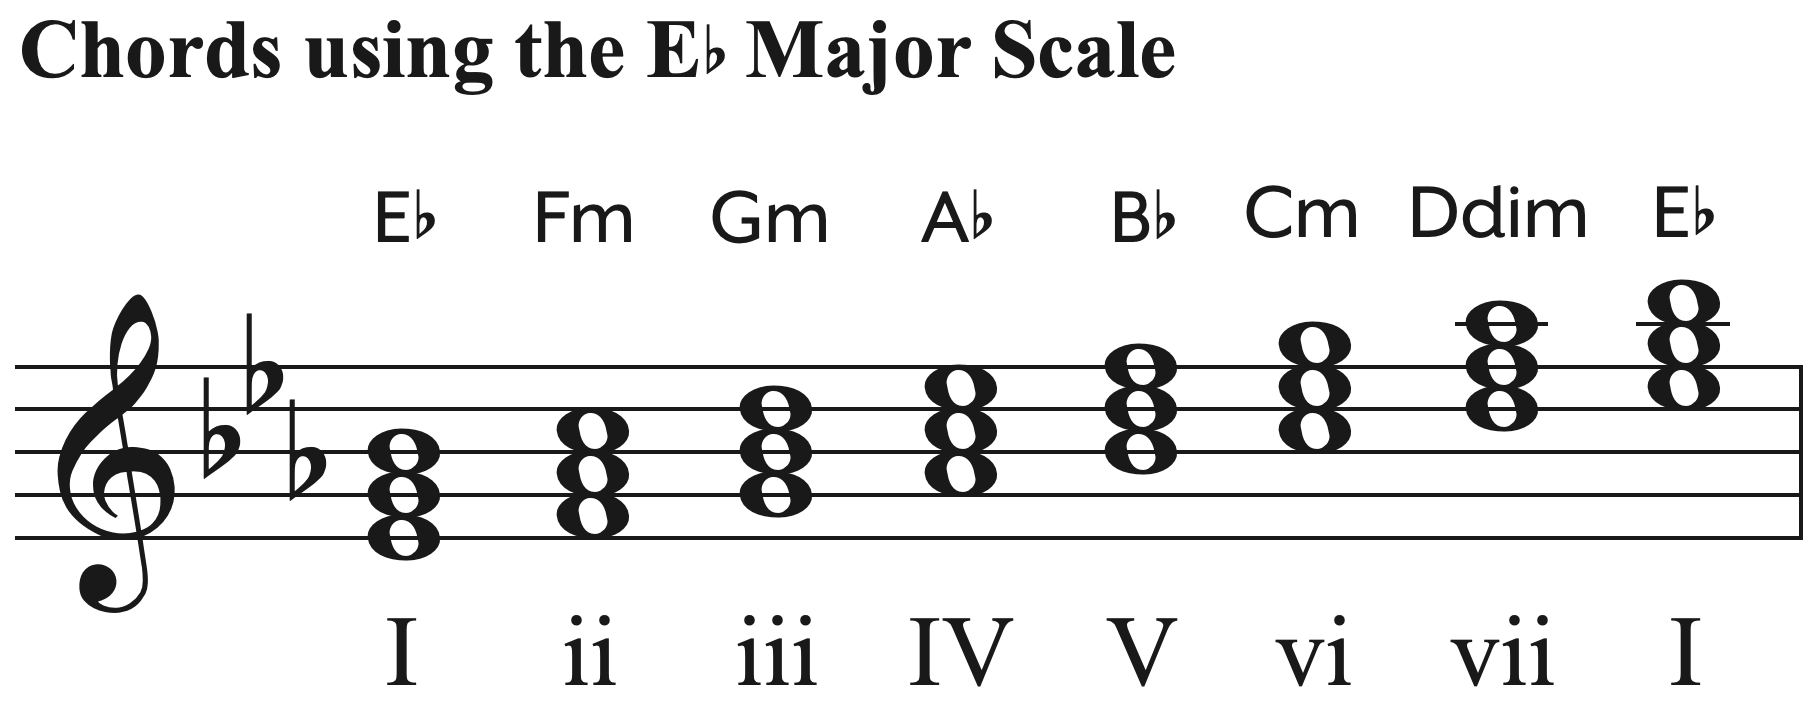 Chords using the E-flat major scale.